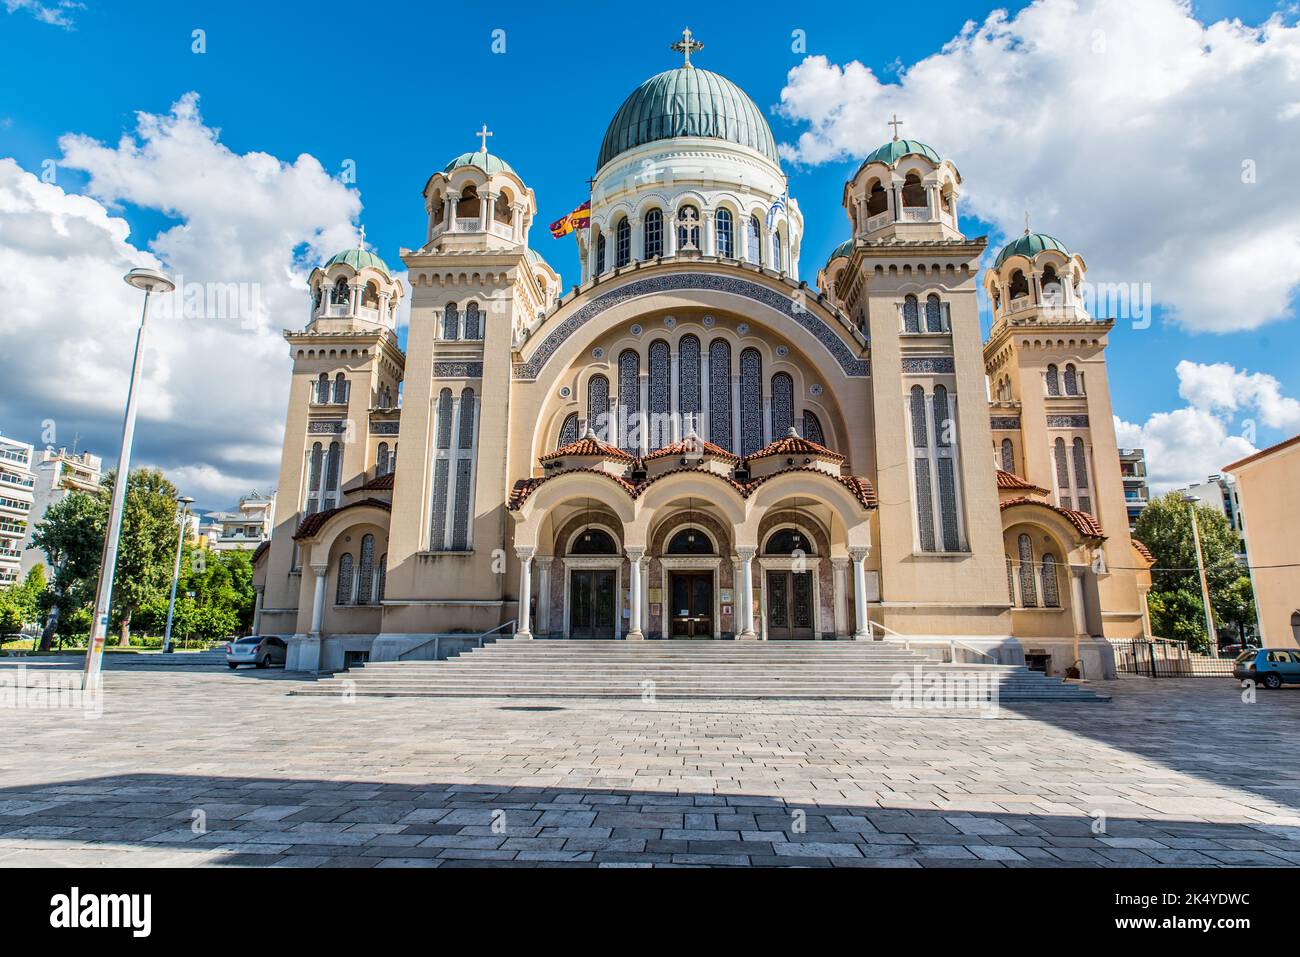 Agios Andreas the landmark church and the metropolis of Patras on a beautiful day with perfect sky color and few clouds, Achaia, Peloponnese, Greece Stock Photo